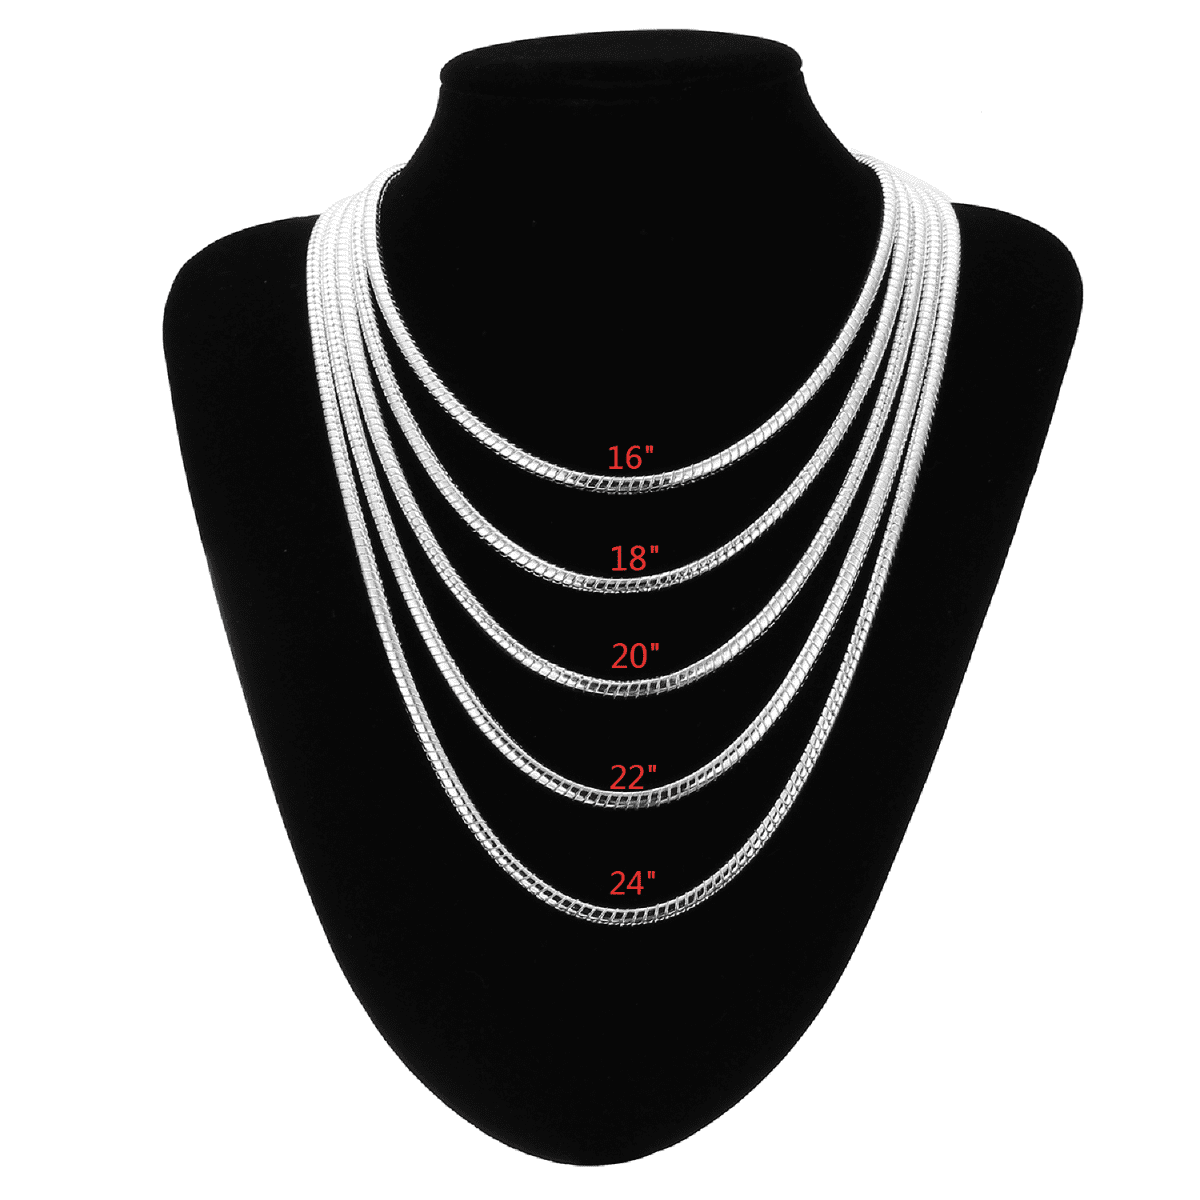 LOL SURPRISE PHOTO CHAIN 18 INCH  NECKLACE SILVER PLATED GIFT BOX,BIRTHDAY PARTY 